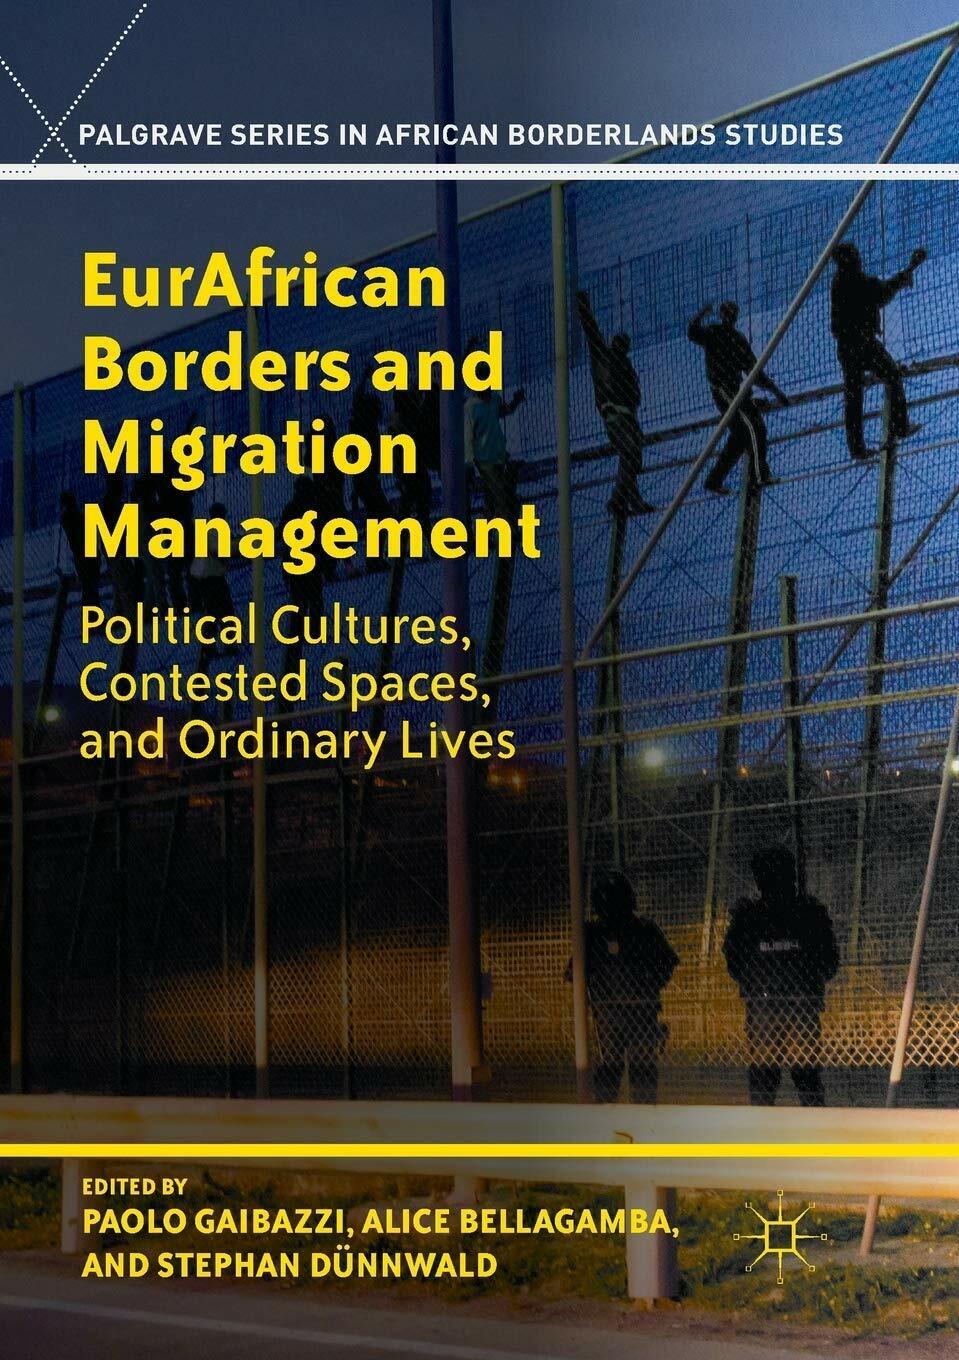 EurAfrican Borders and Migration Management - Paolo Gaibazzi  - Palgrave, 2018